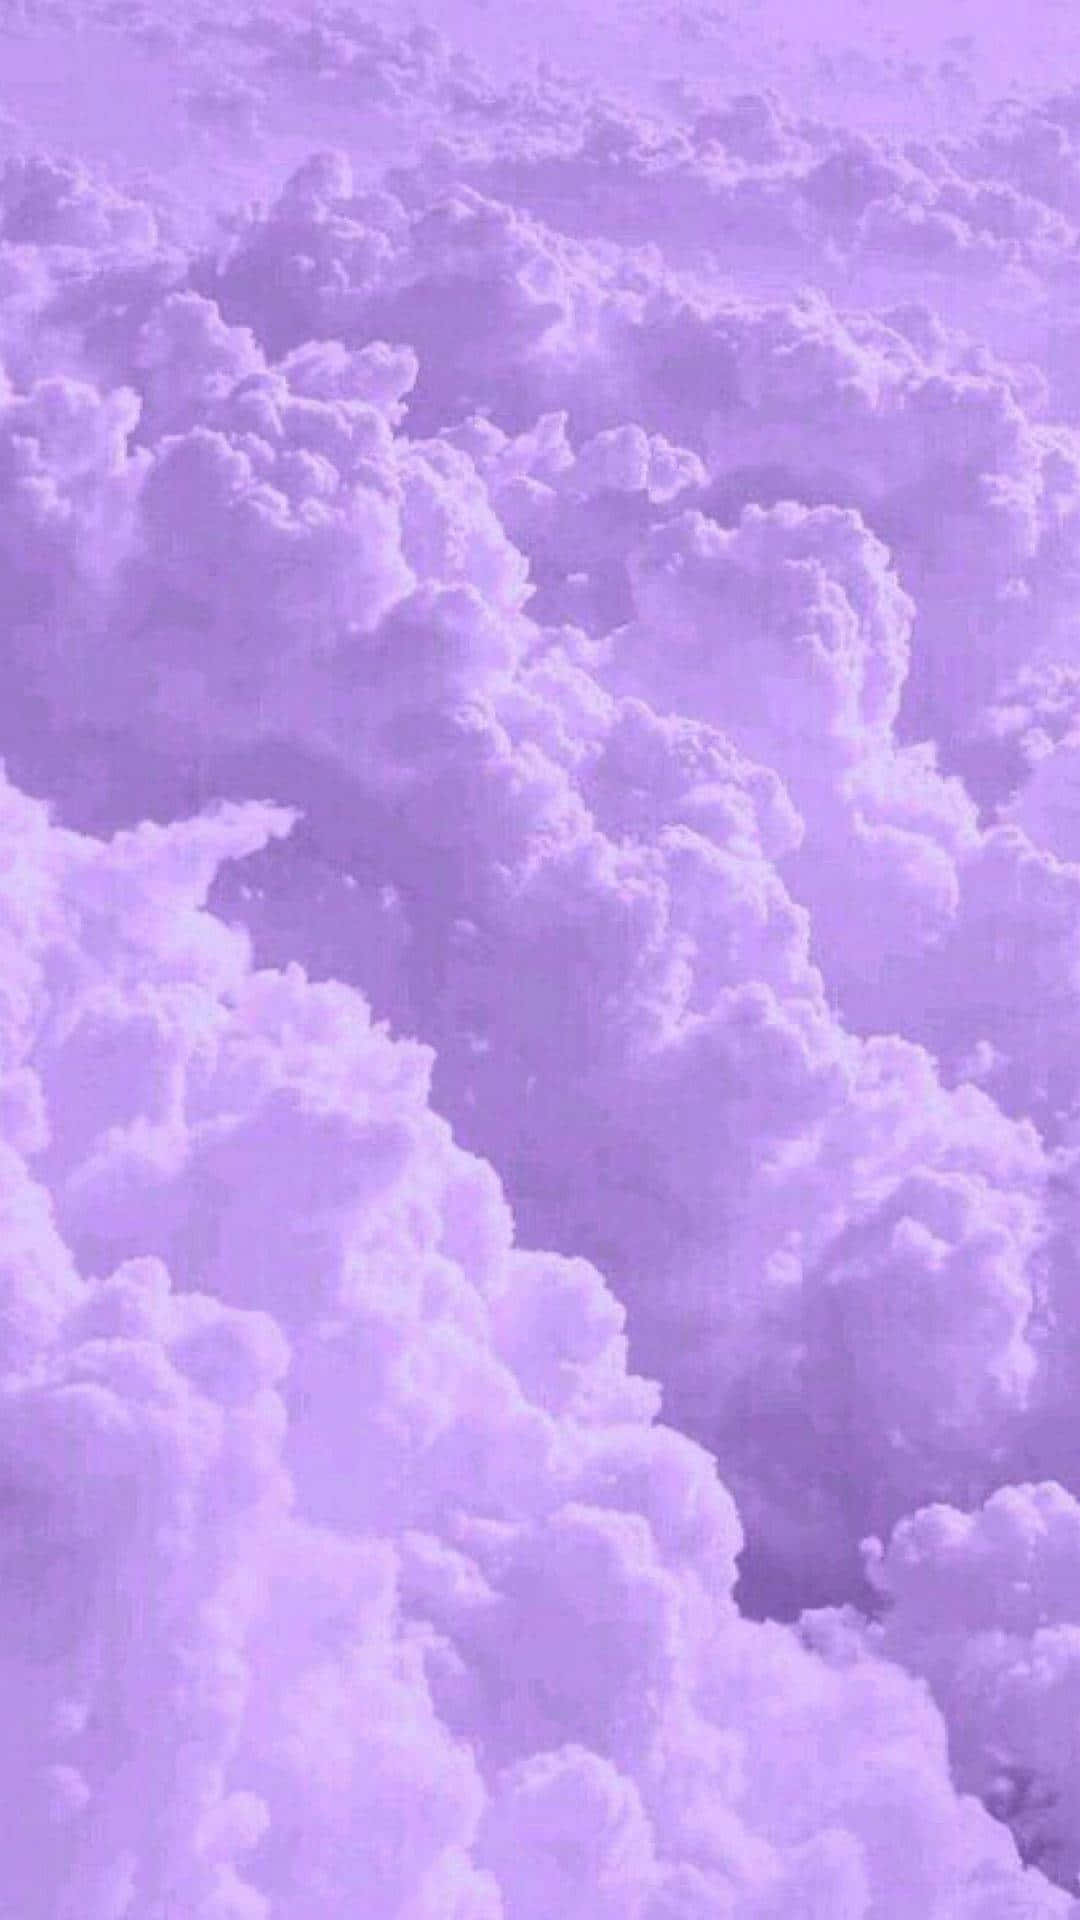 Free Clouds Aesthetic Tumblr Wallpaper Downloads, Clouds Aesthetic Tumblr Wallpaper for FREE